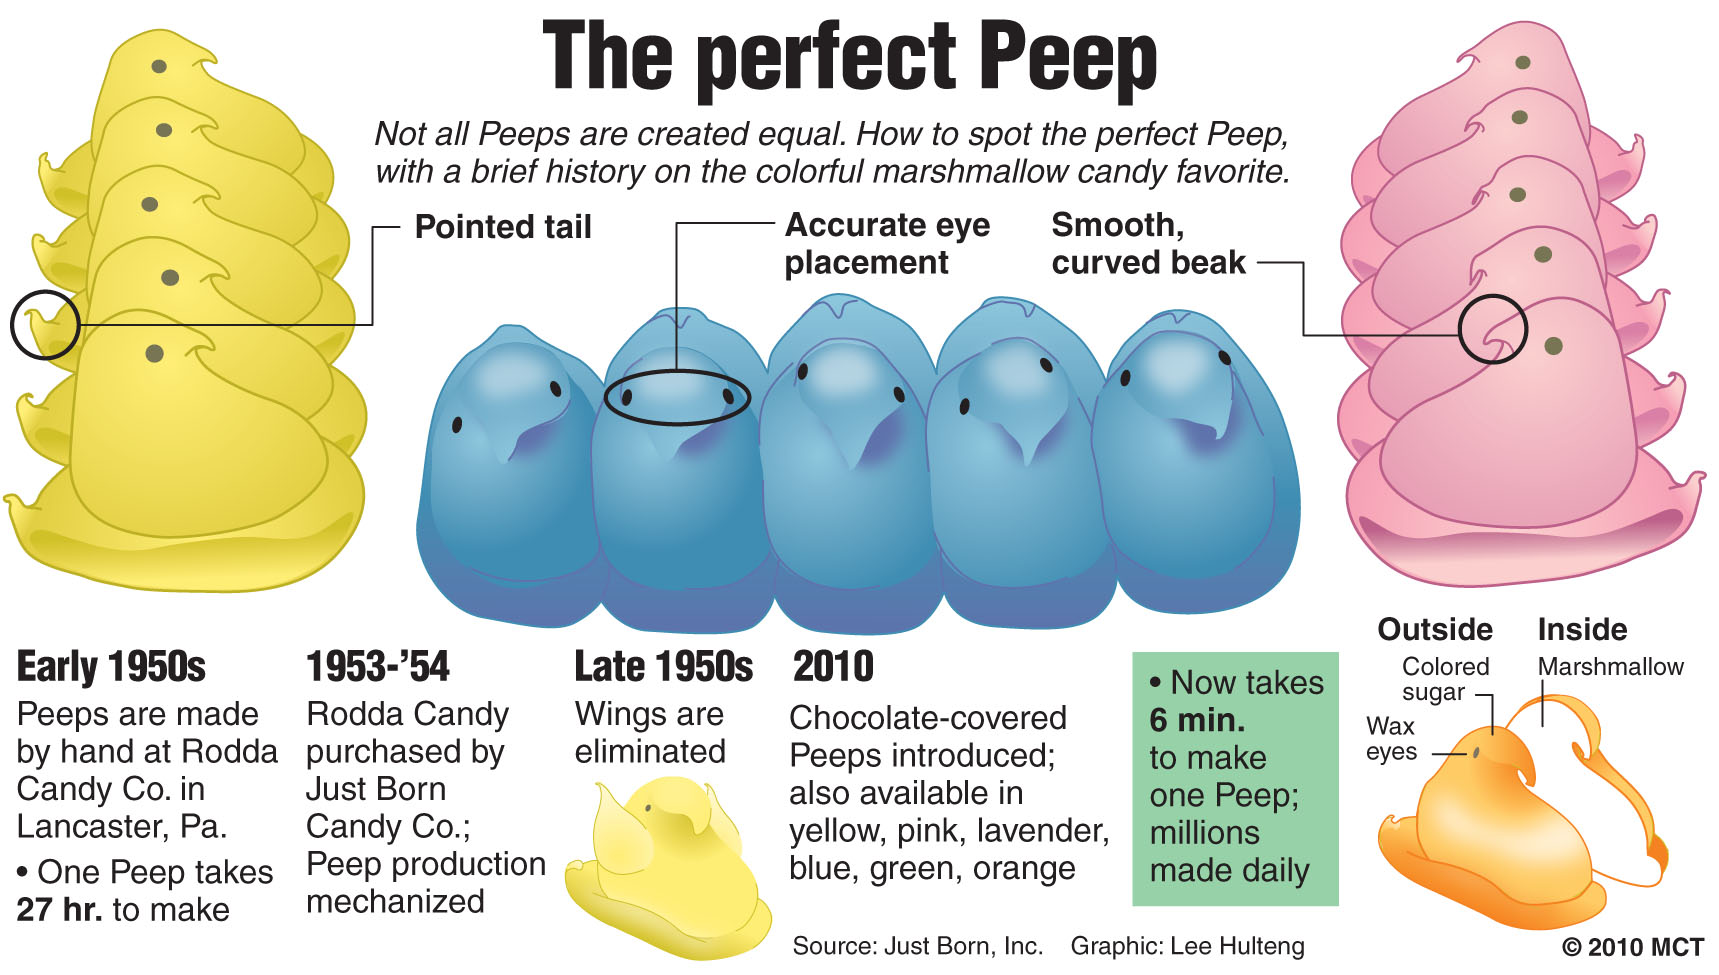 perfect peep - The perfect Peep Not all Peeps are created equal. How to spot the perfect Peep, with a brief history on the colorful marshmallow candy favorite. r Pointed tail Accurate eye Smooth, placement curved beak Outside Colored sugar Inside Marshmal